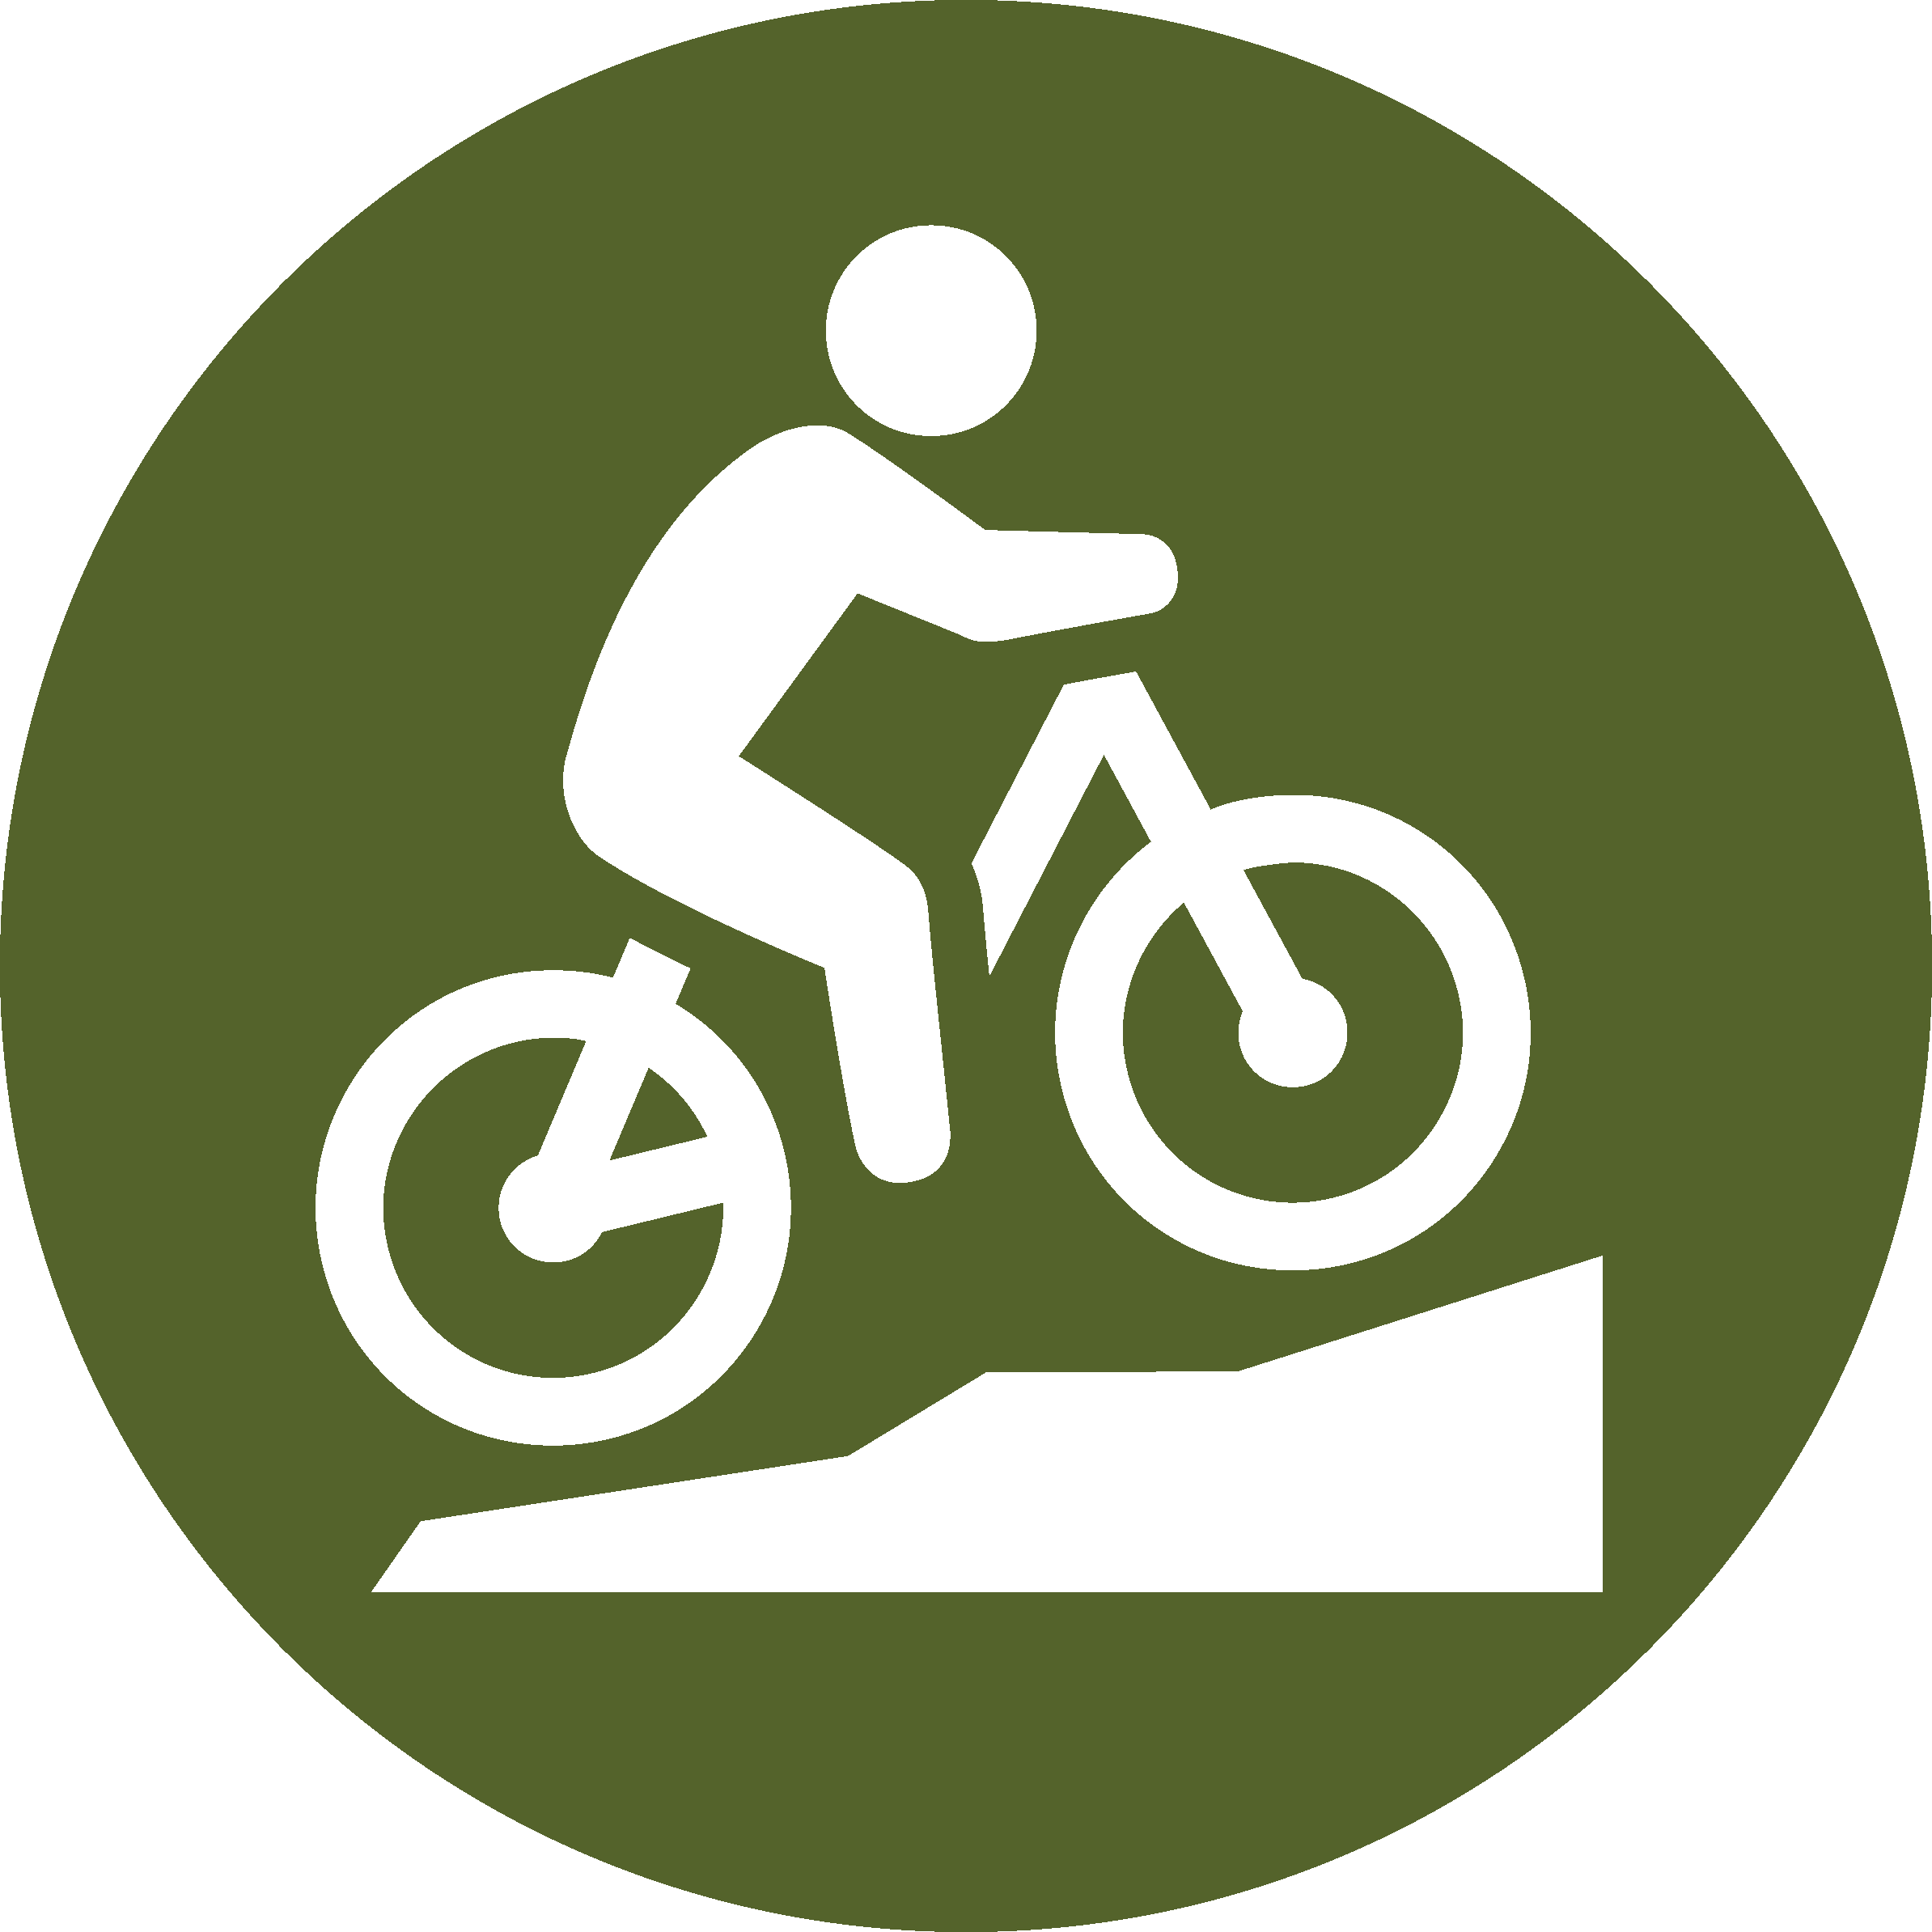 icon of person on bike going up an incline